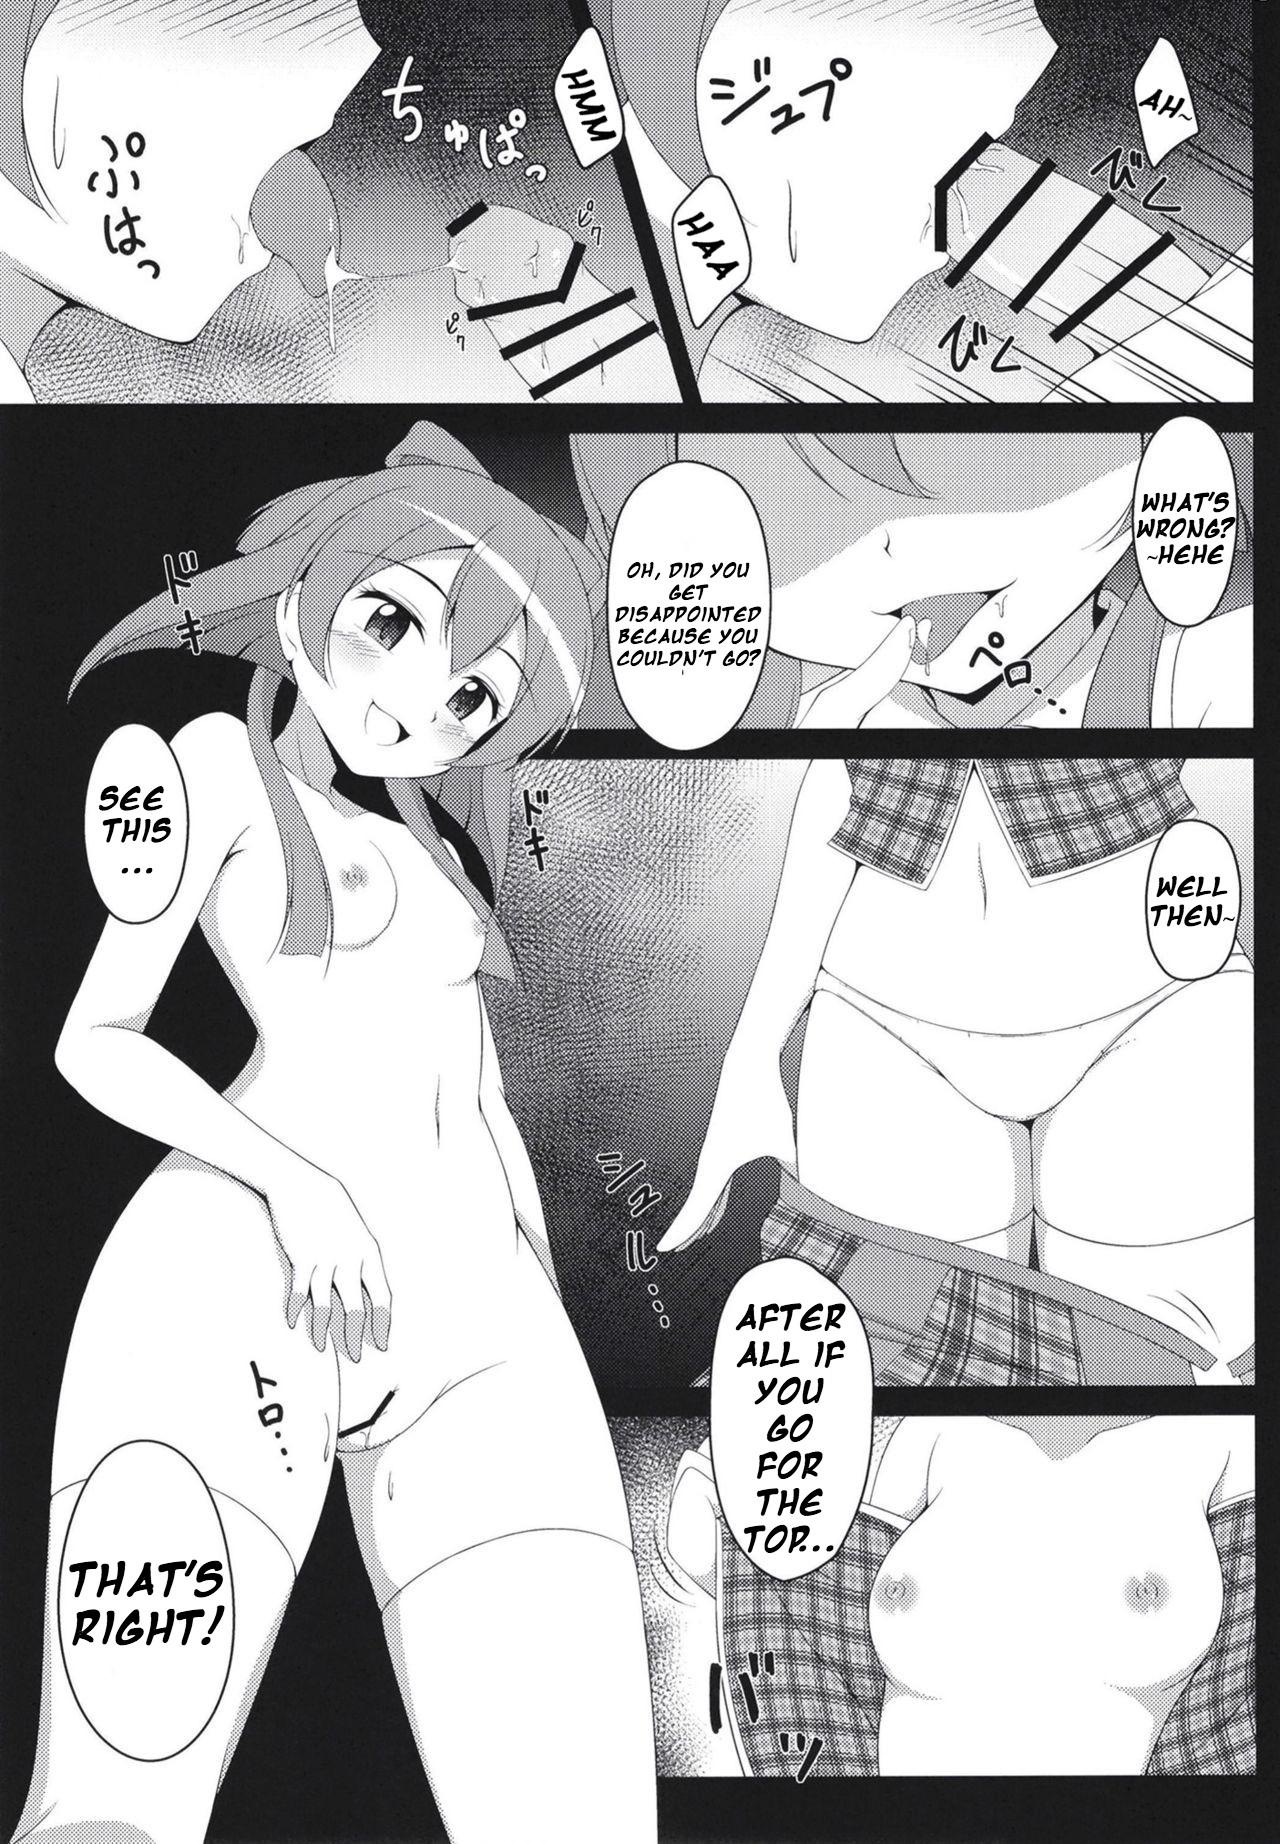 Femboy After-party - Puella magi madoka magica side story magia record Hard Core Sex - Page 8